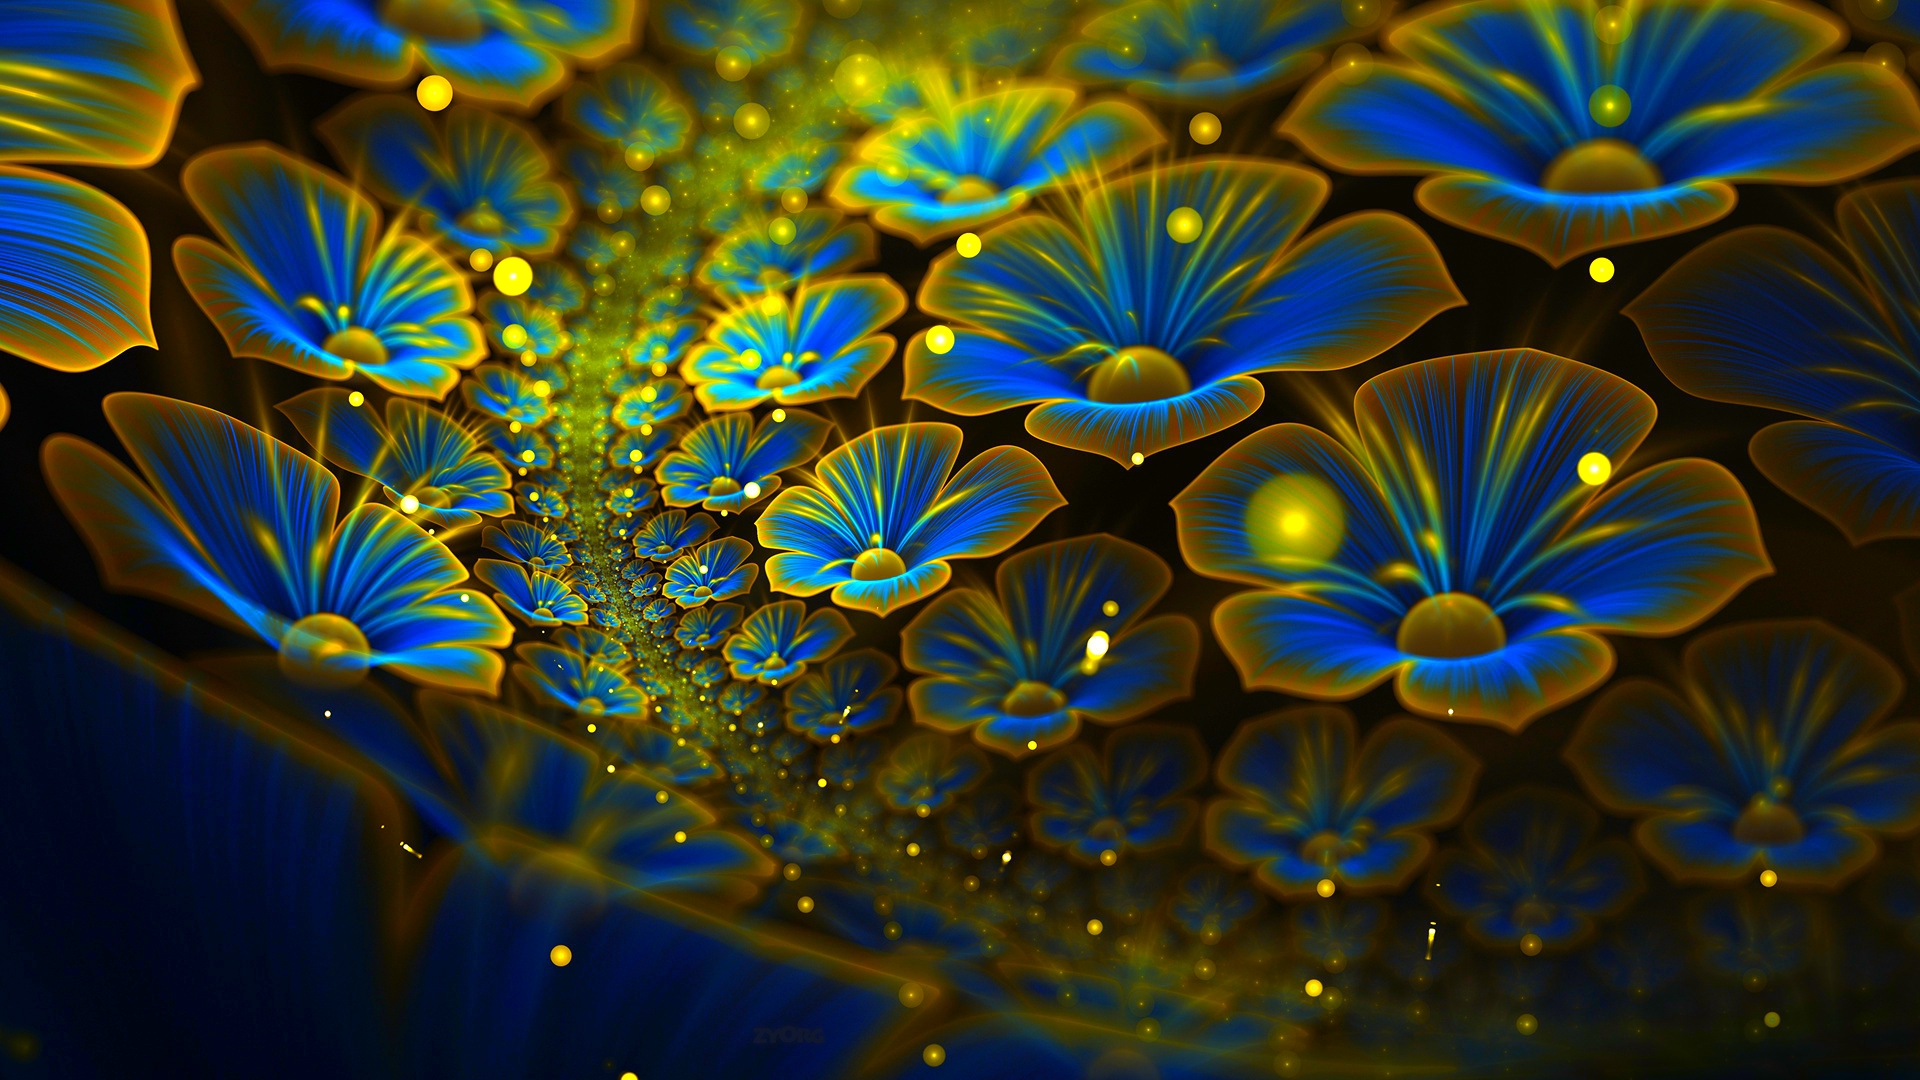 Abstract Anime Nature Wallpaper 1920 X 1080 14189 Hd Wallpapers 1920x1080